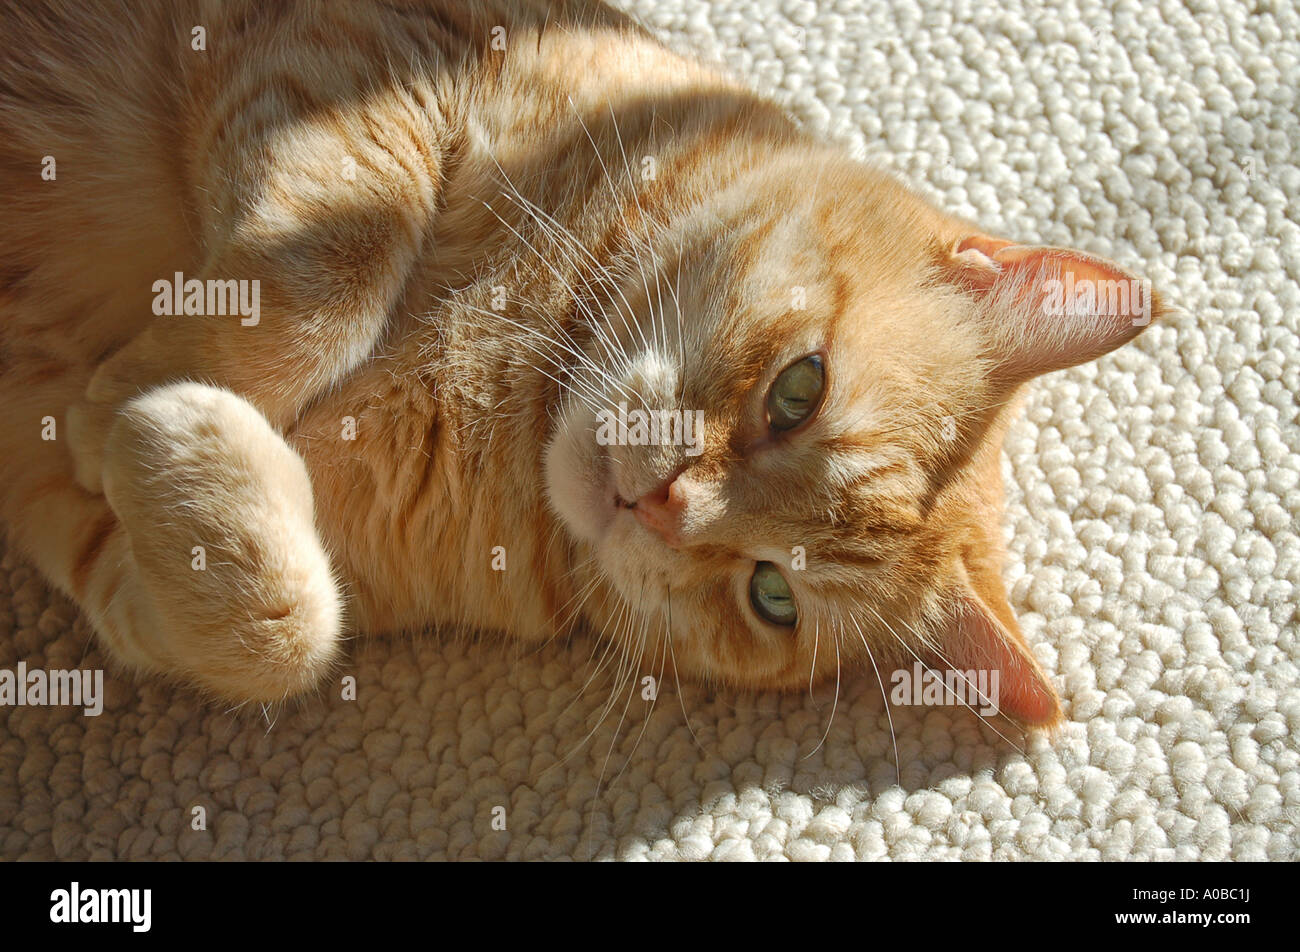 Yellow striped cat with green eyes sitting in the sun Stock Photo